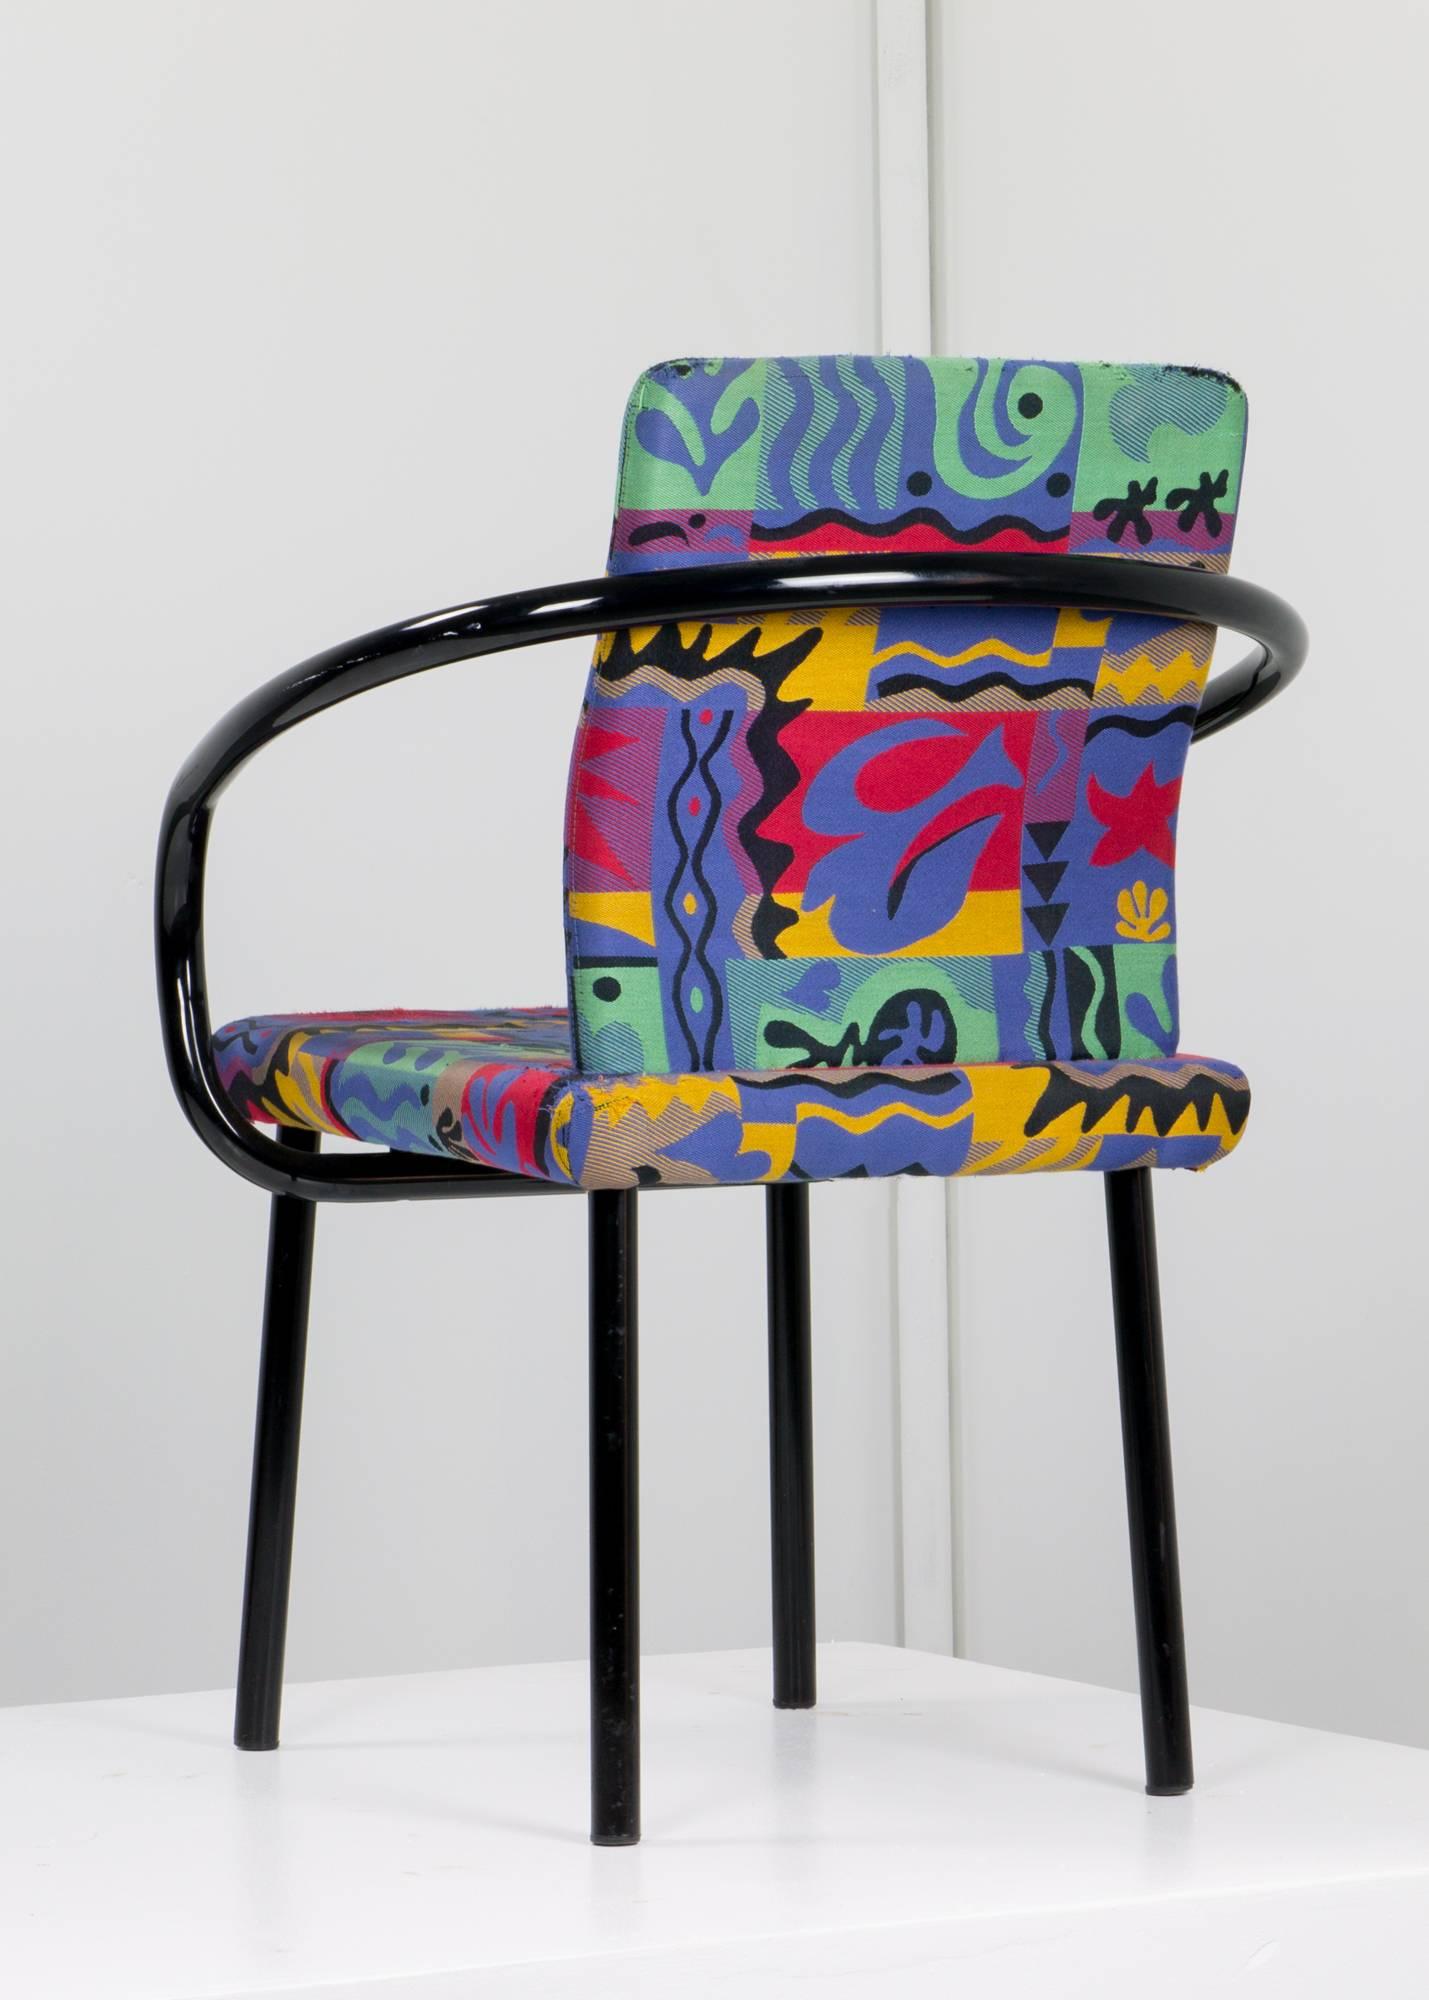 Pair of Mandarin chairs by Ettore Sottsass for Knoll in vibrant original Matisse-esque fabric with sinuous enameled steel frames nodding to traditional Chinese yoke-back chairs. 